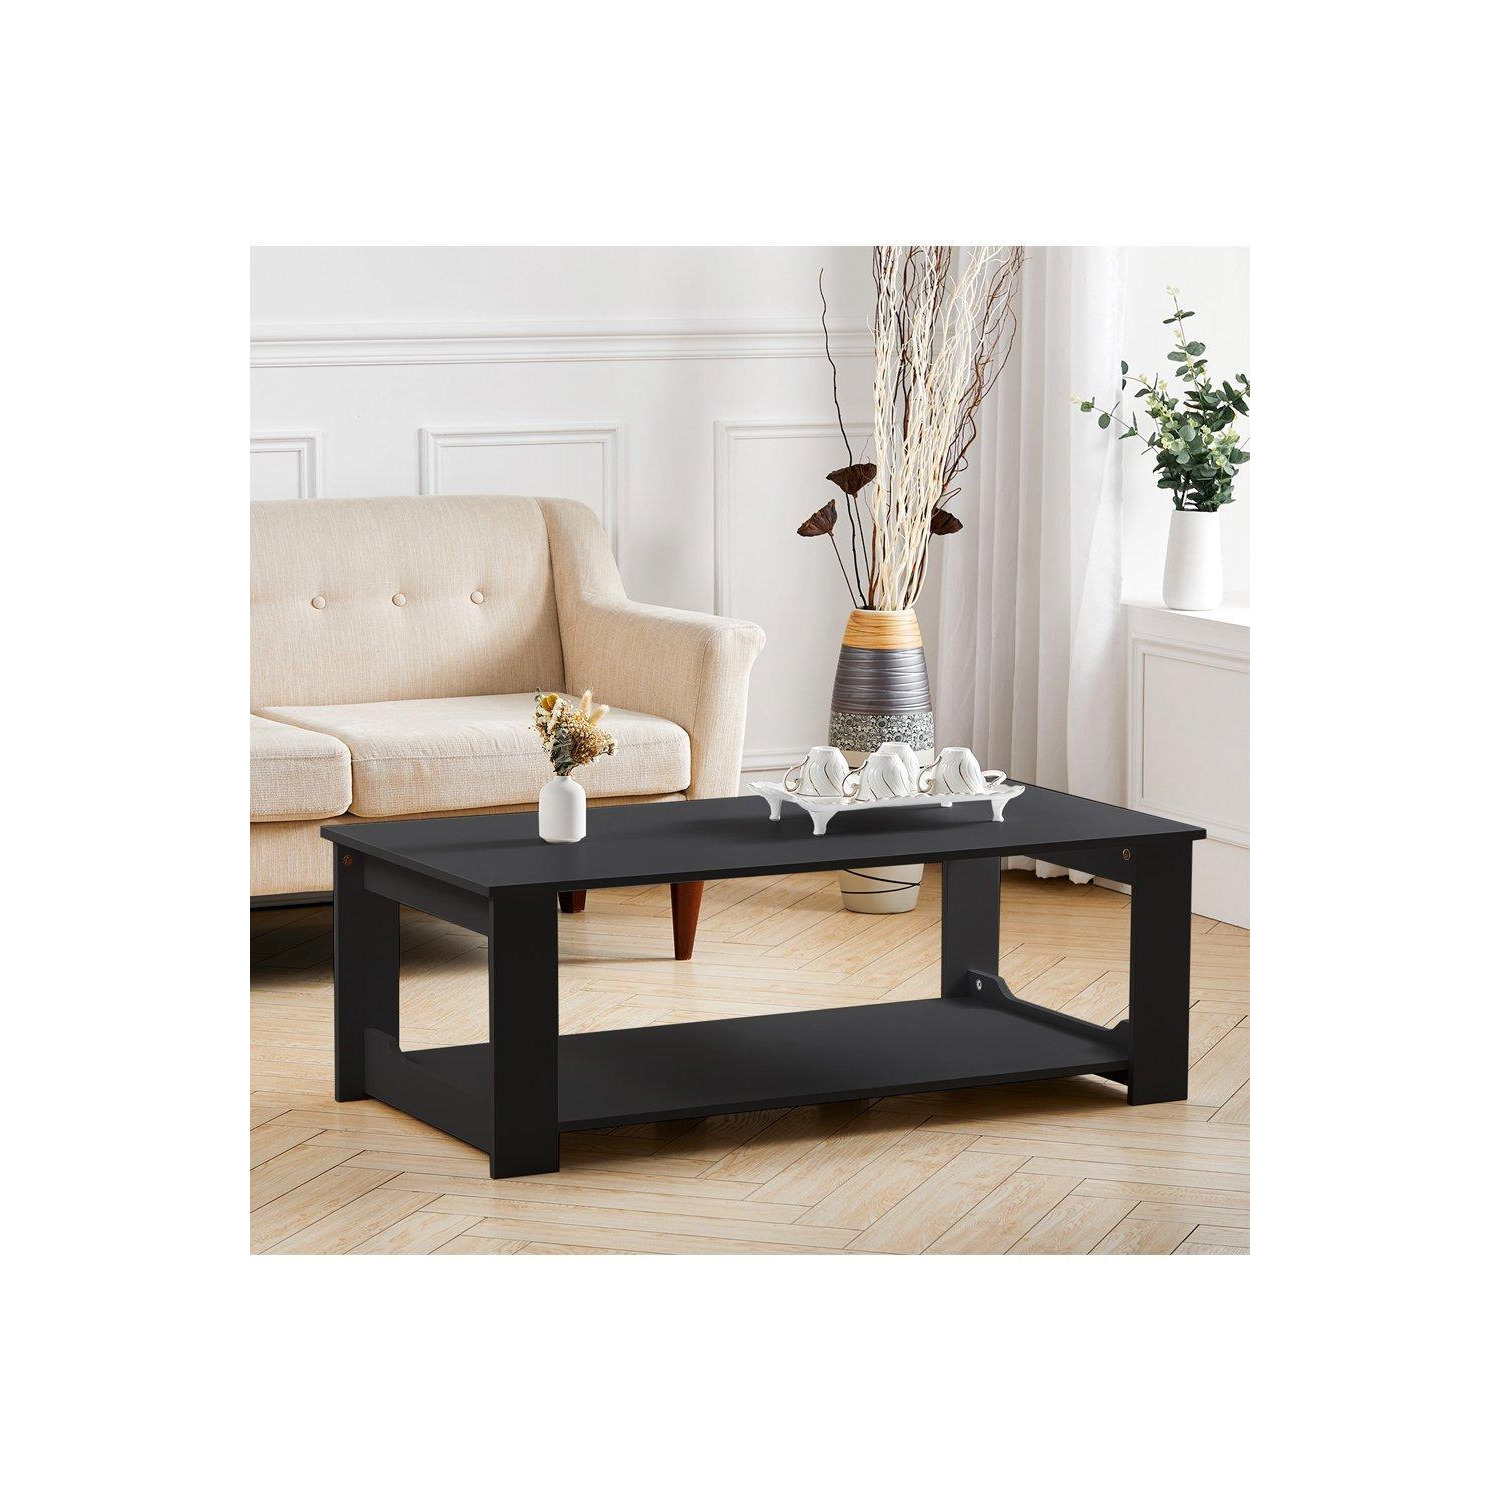 Datrick Coffee Table with Storage - image 1